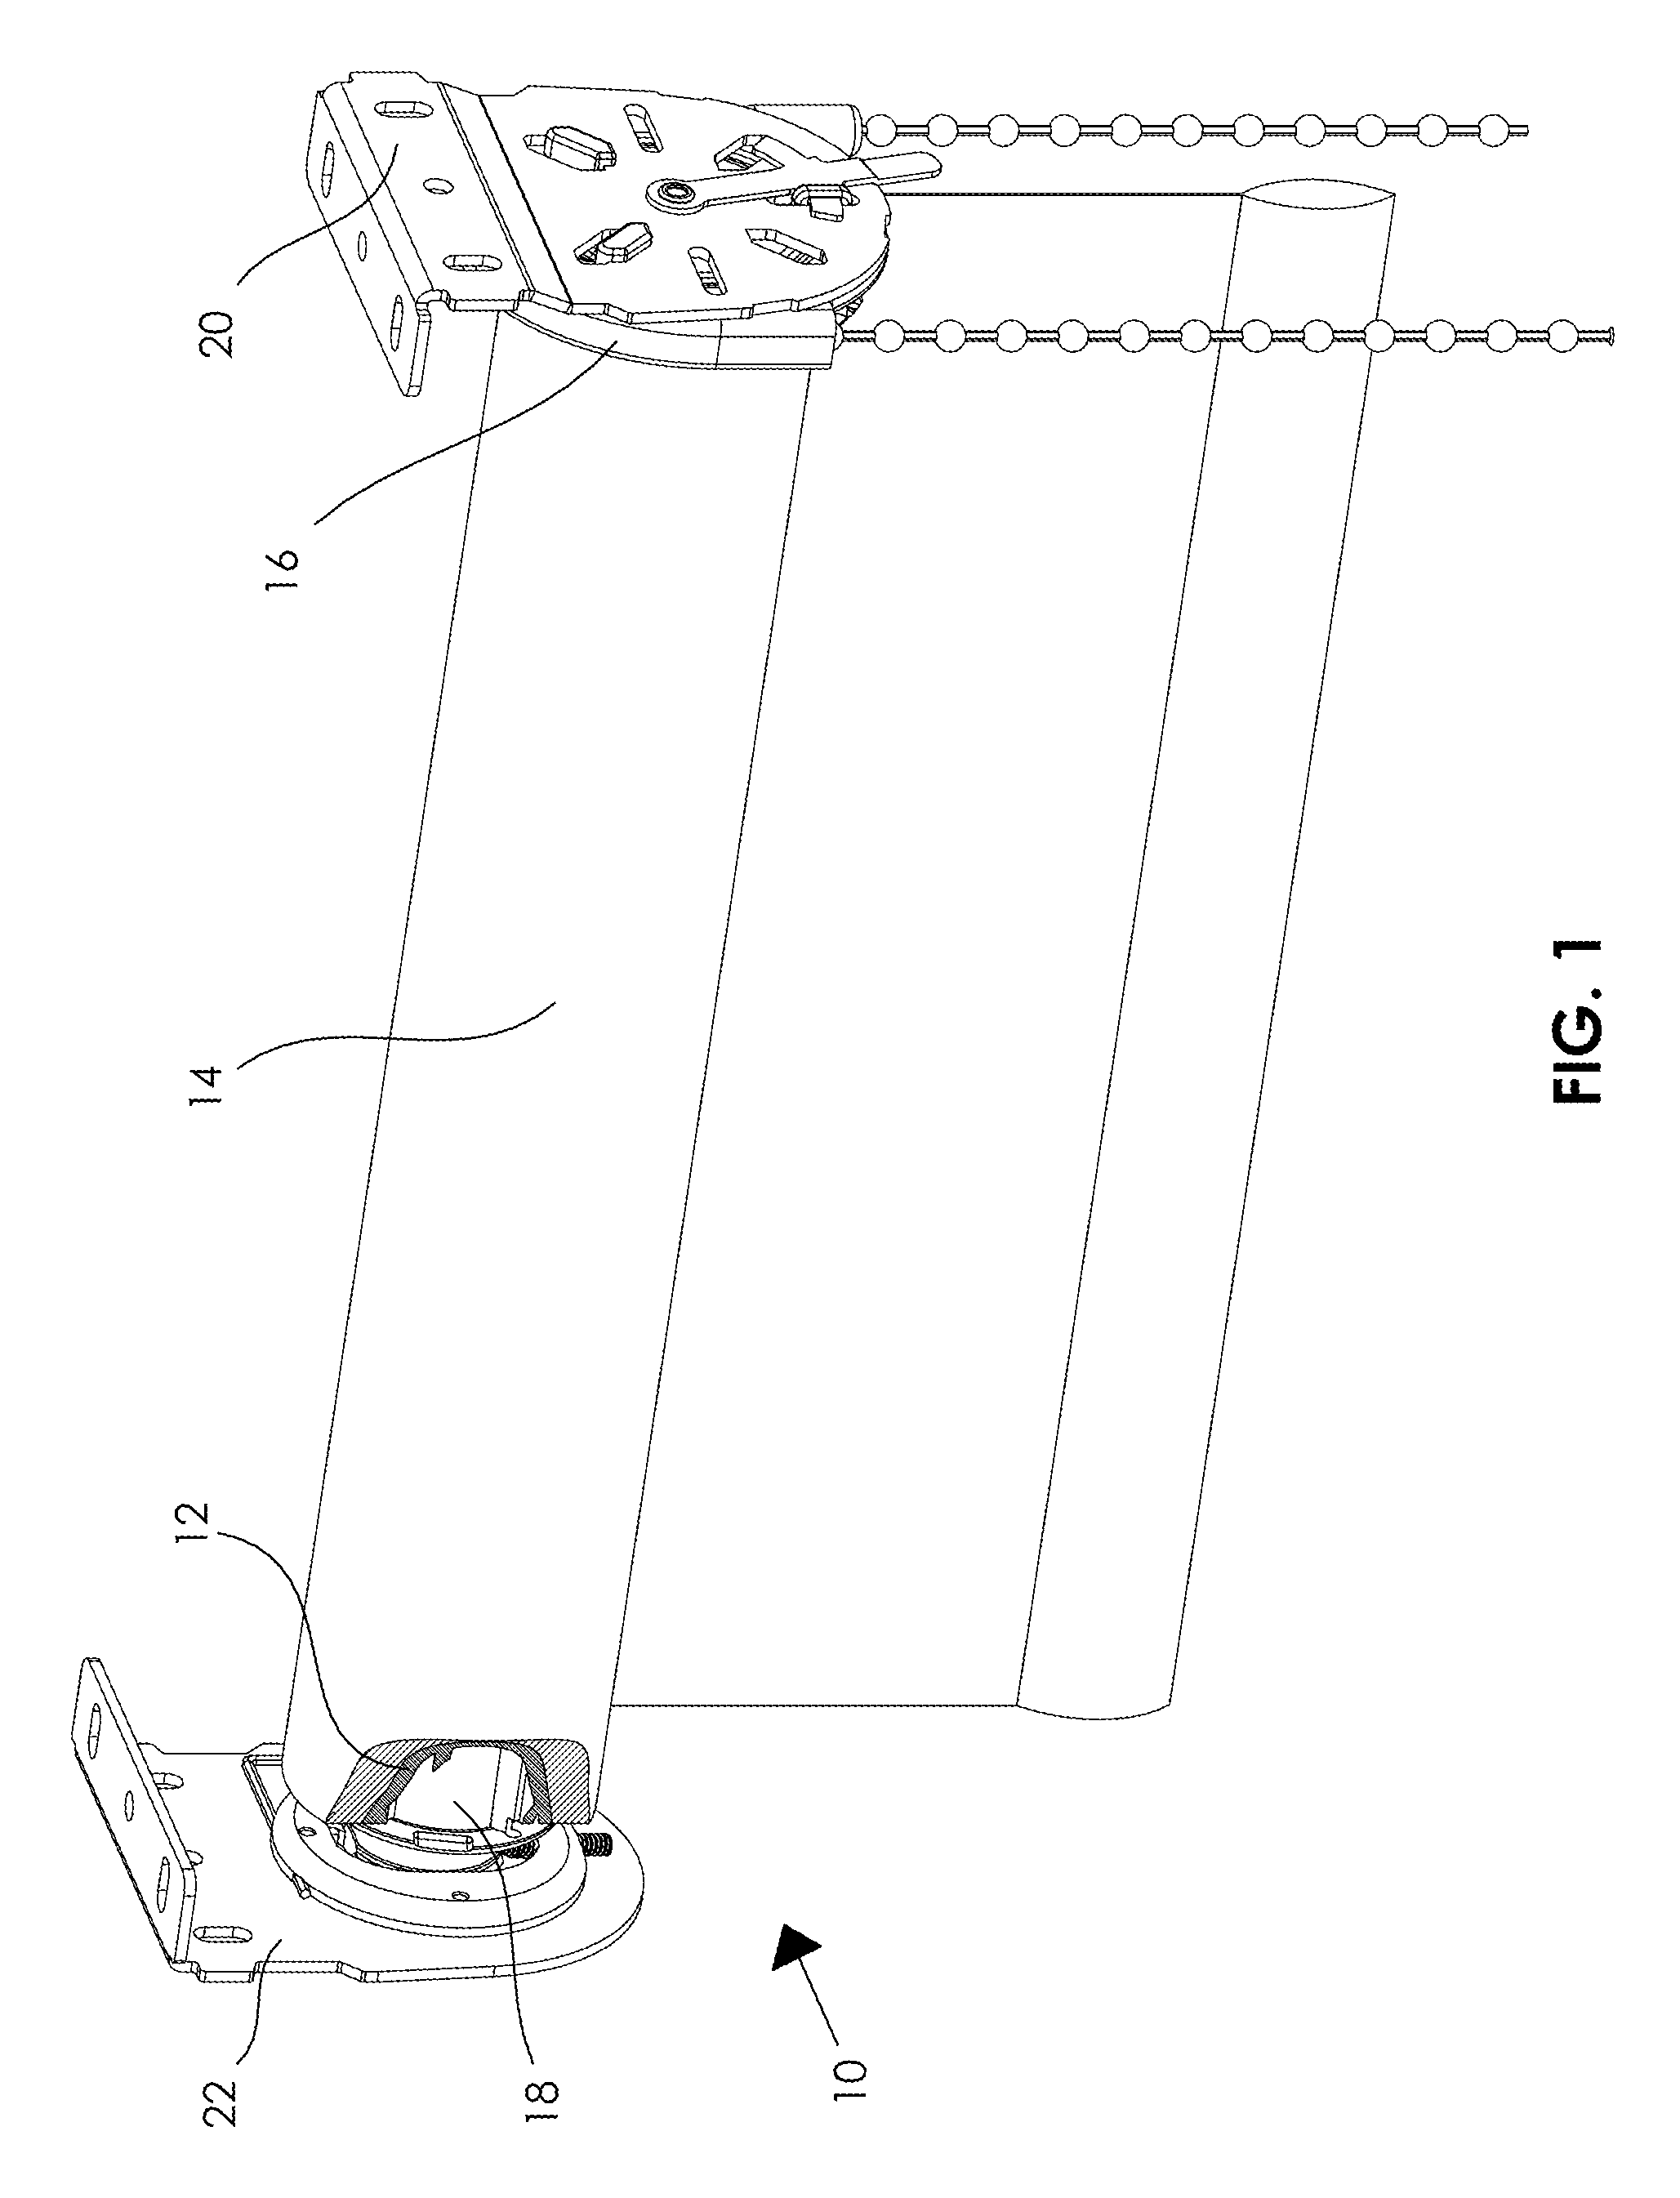 Roller shade system and method